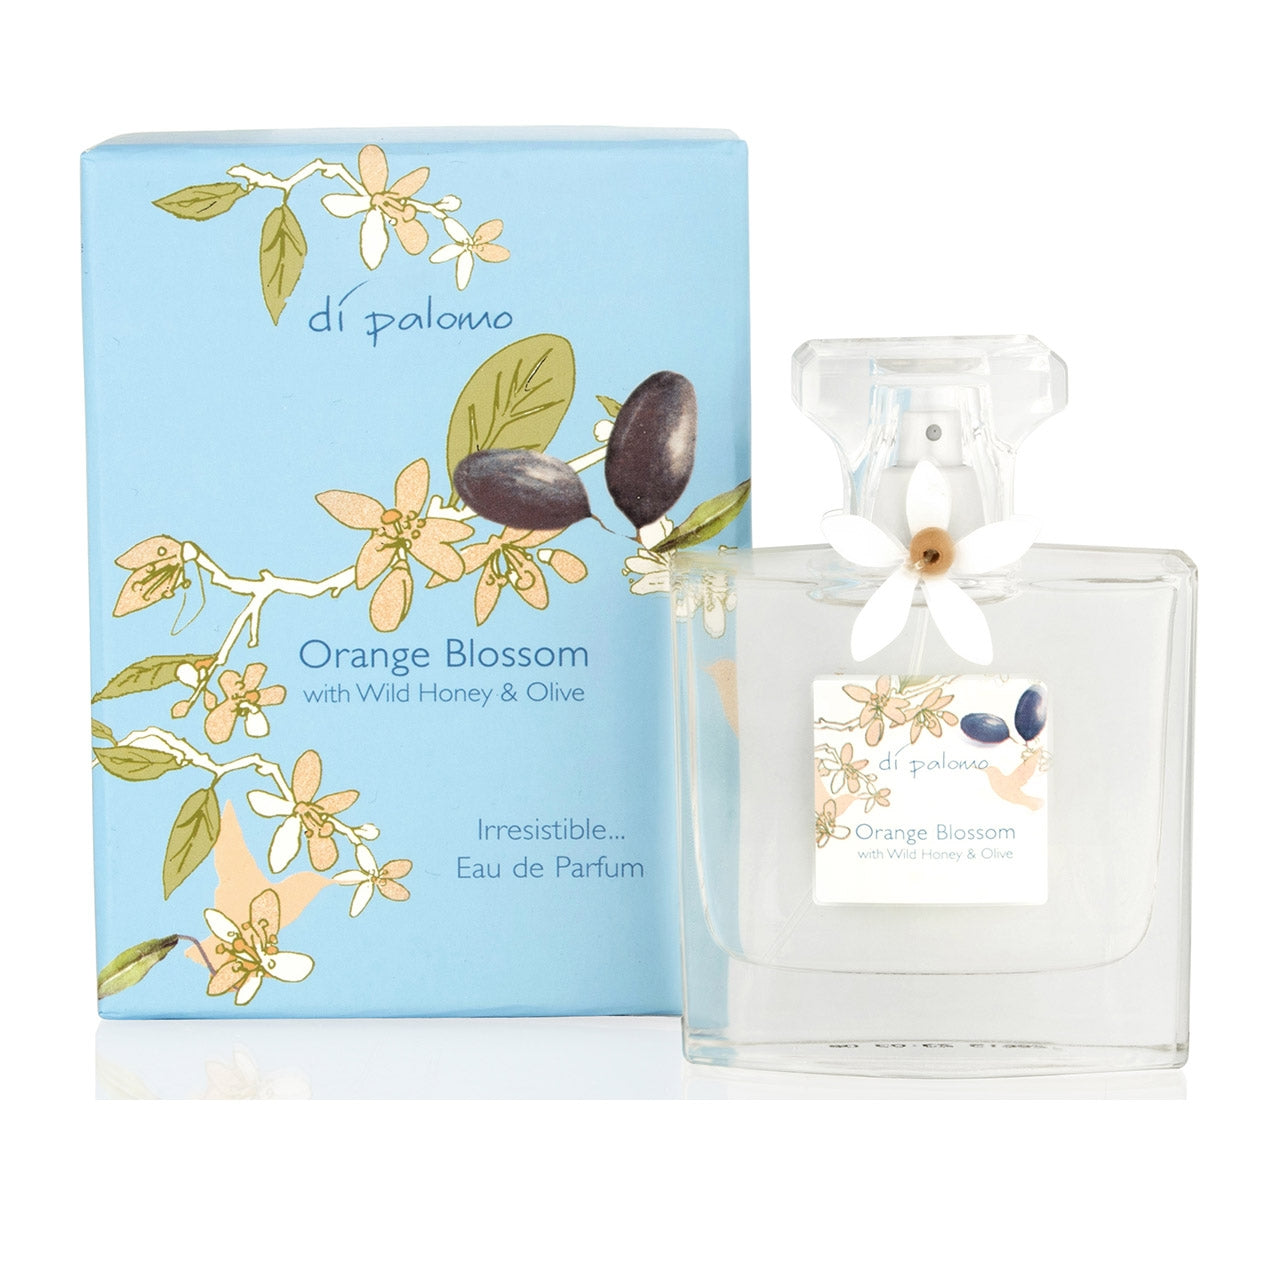 Simply irresistible! Fragrance yourself with Orange Blossom to last throughout the day to leave your skin and clothes smelling delicious. Expertly blended with the finest ingredients for that extra special Italian luxury!